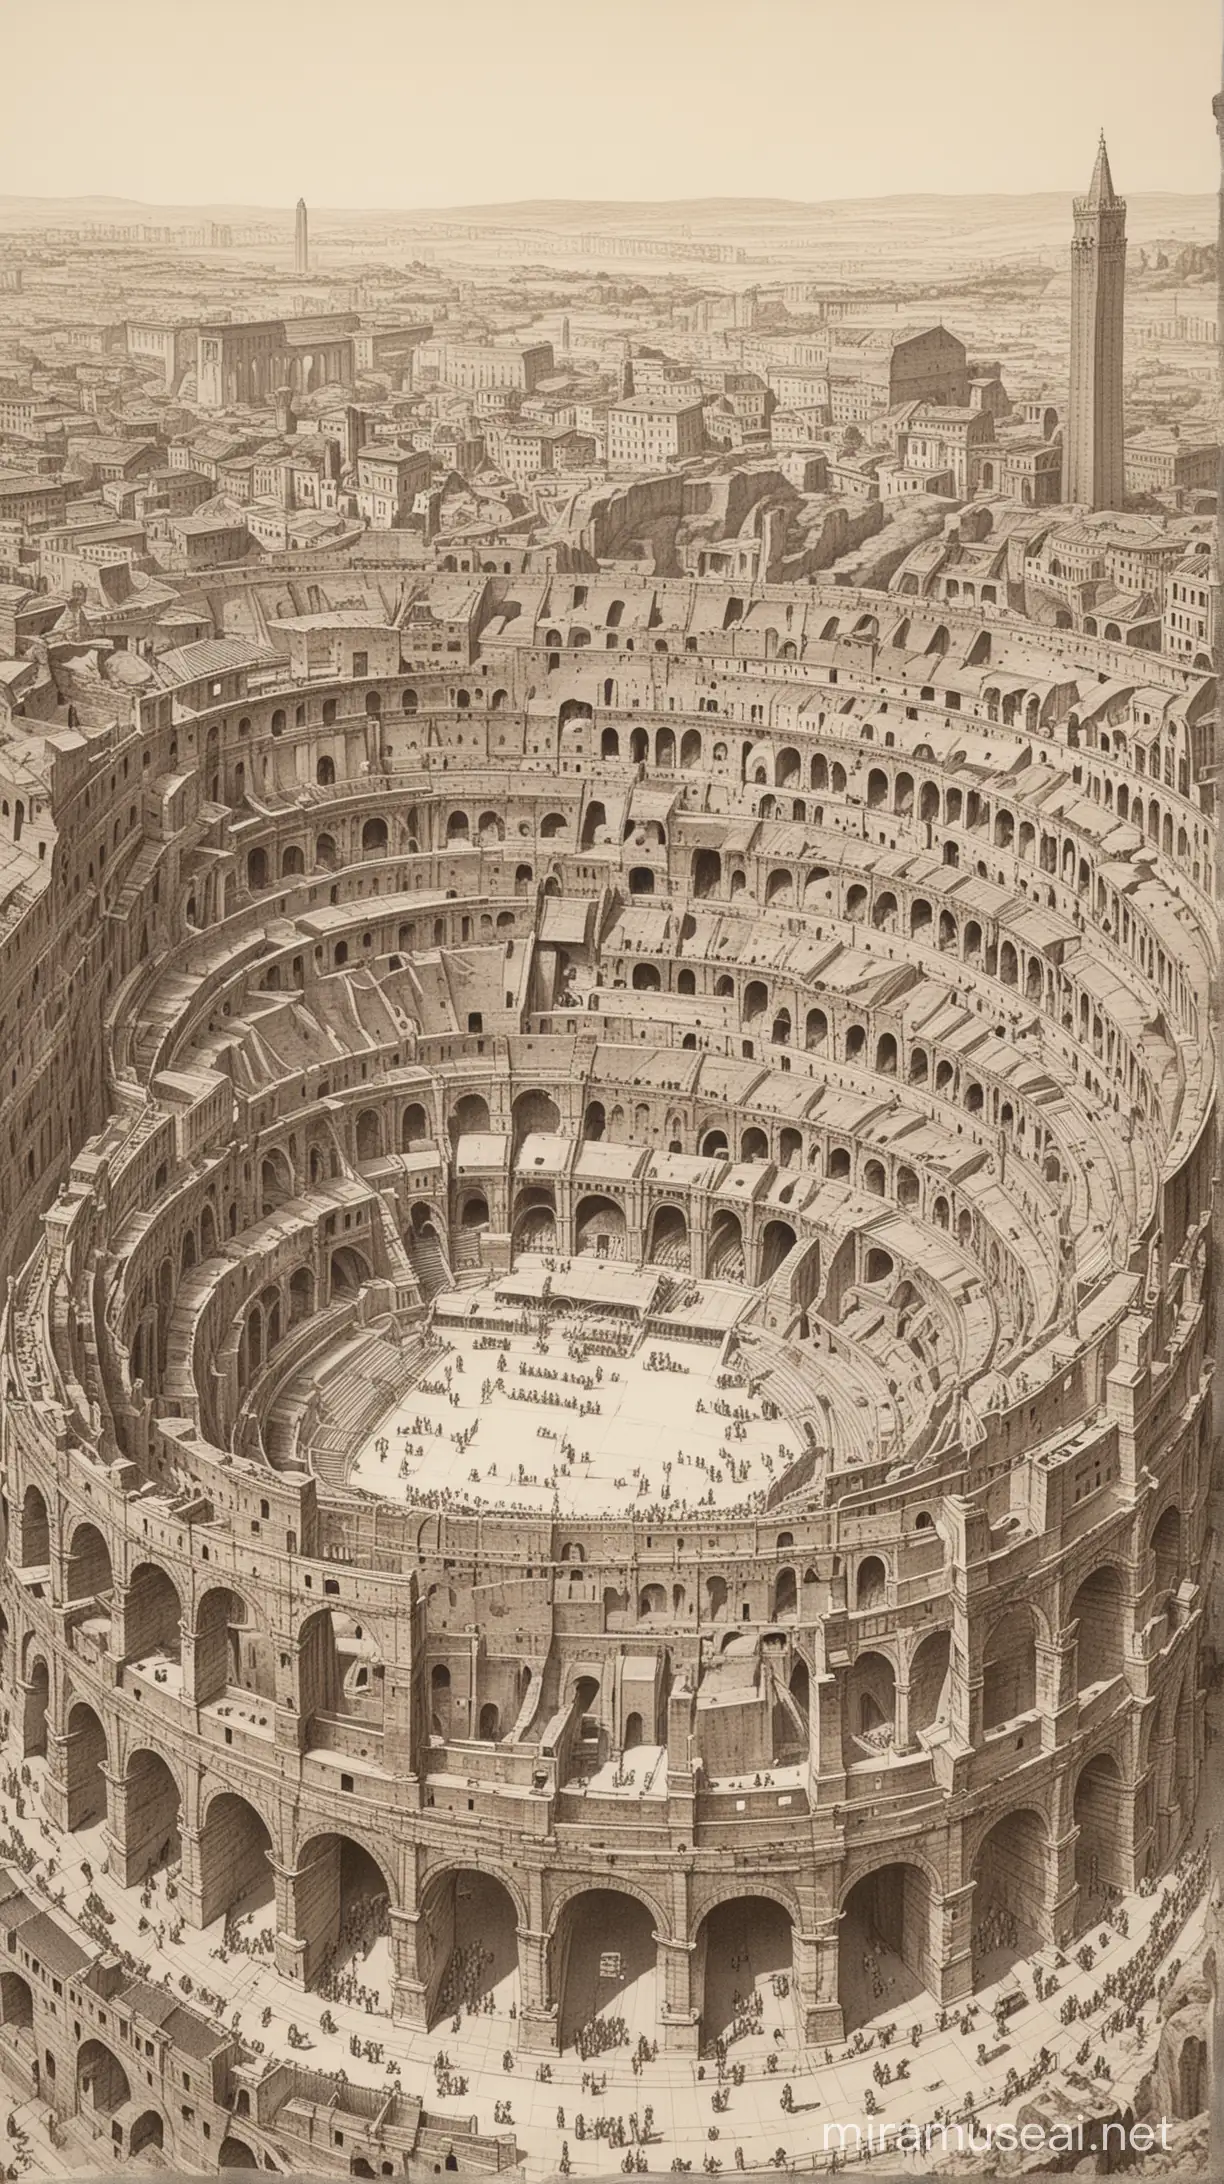 A drawing depicting the mastery of Roman engineers: In a detailed drawing, the intricacies of the impressive architecture of the Colosseum and structural details can be seen. High galleries, columns, and arches, as well as arrangements inside the arena, are central to the drawing. This depiction highlights the engineering genius and reflects an important example of the architectural legacy of the Roman Empire.

